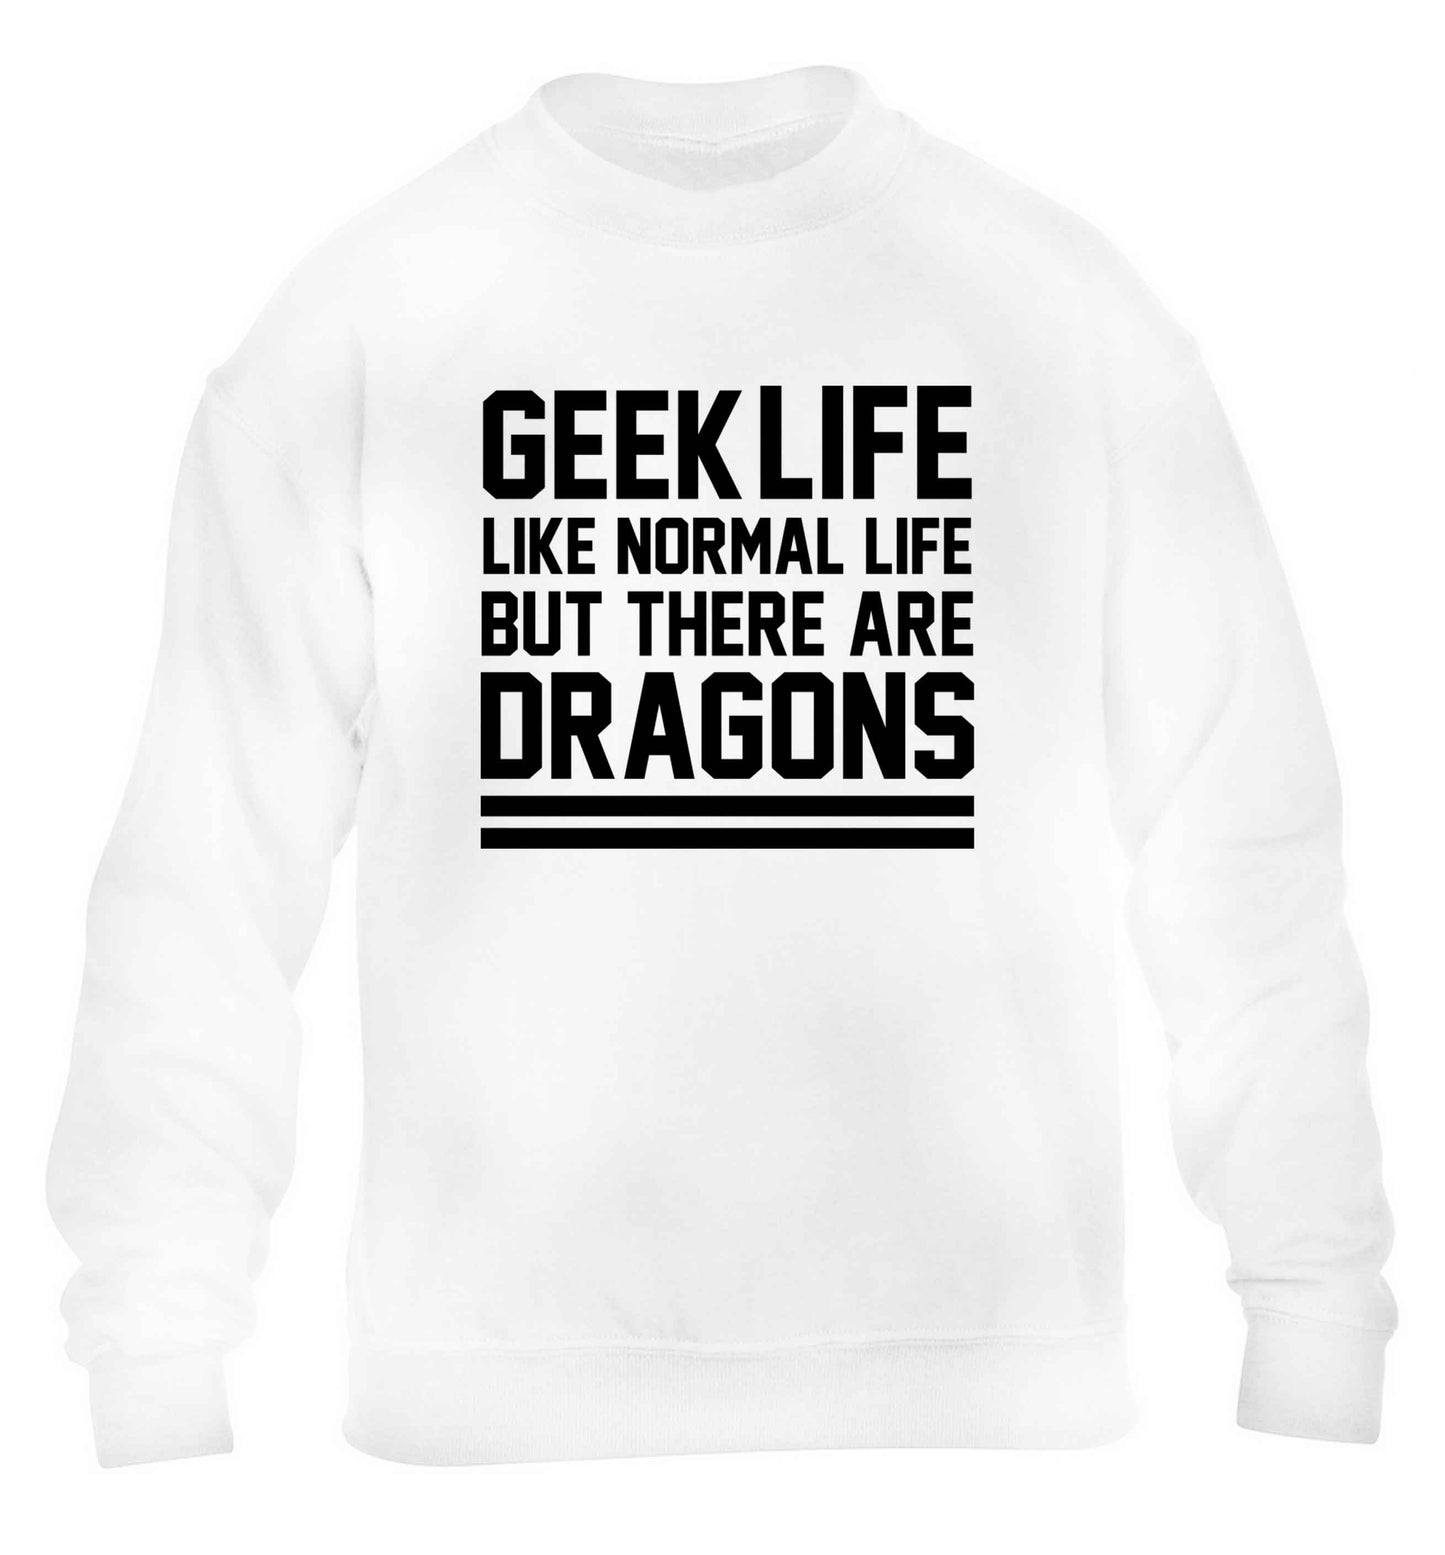 Geek life like normal life but there are dragons children's white sweater 12-13 Years